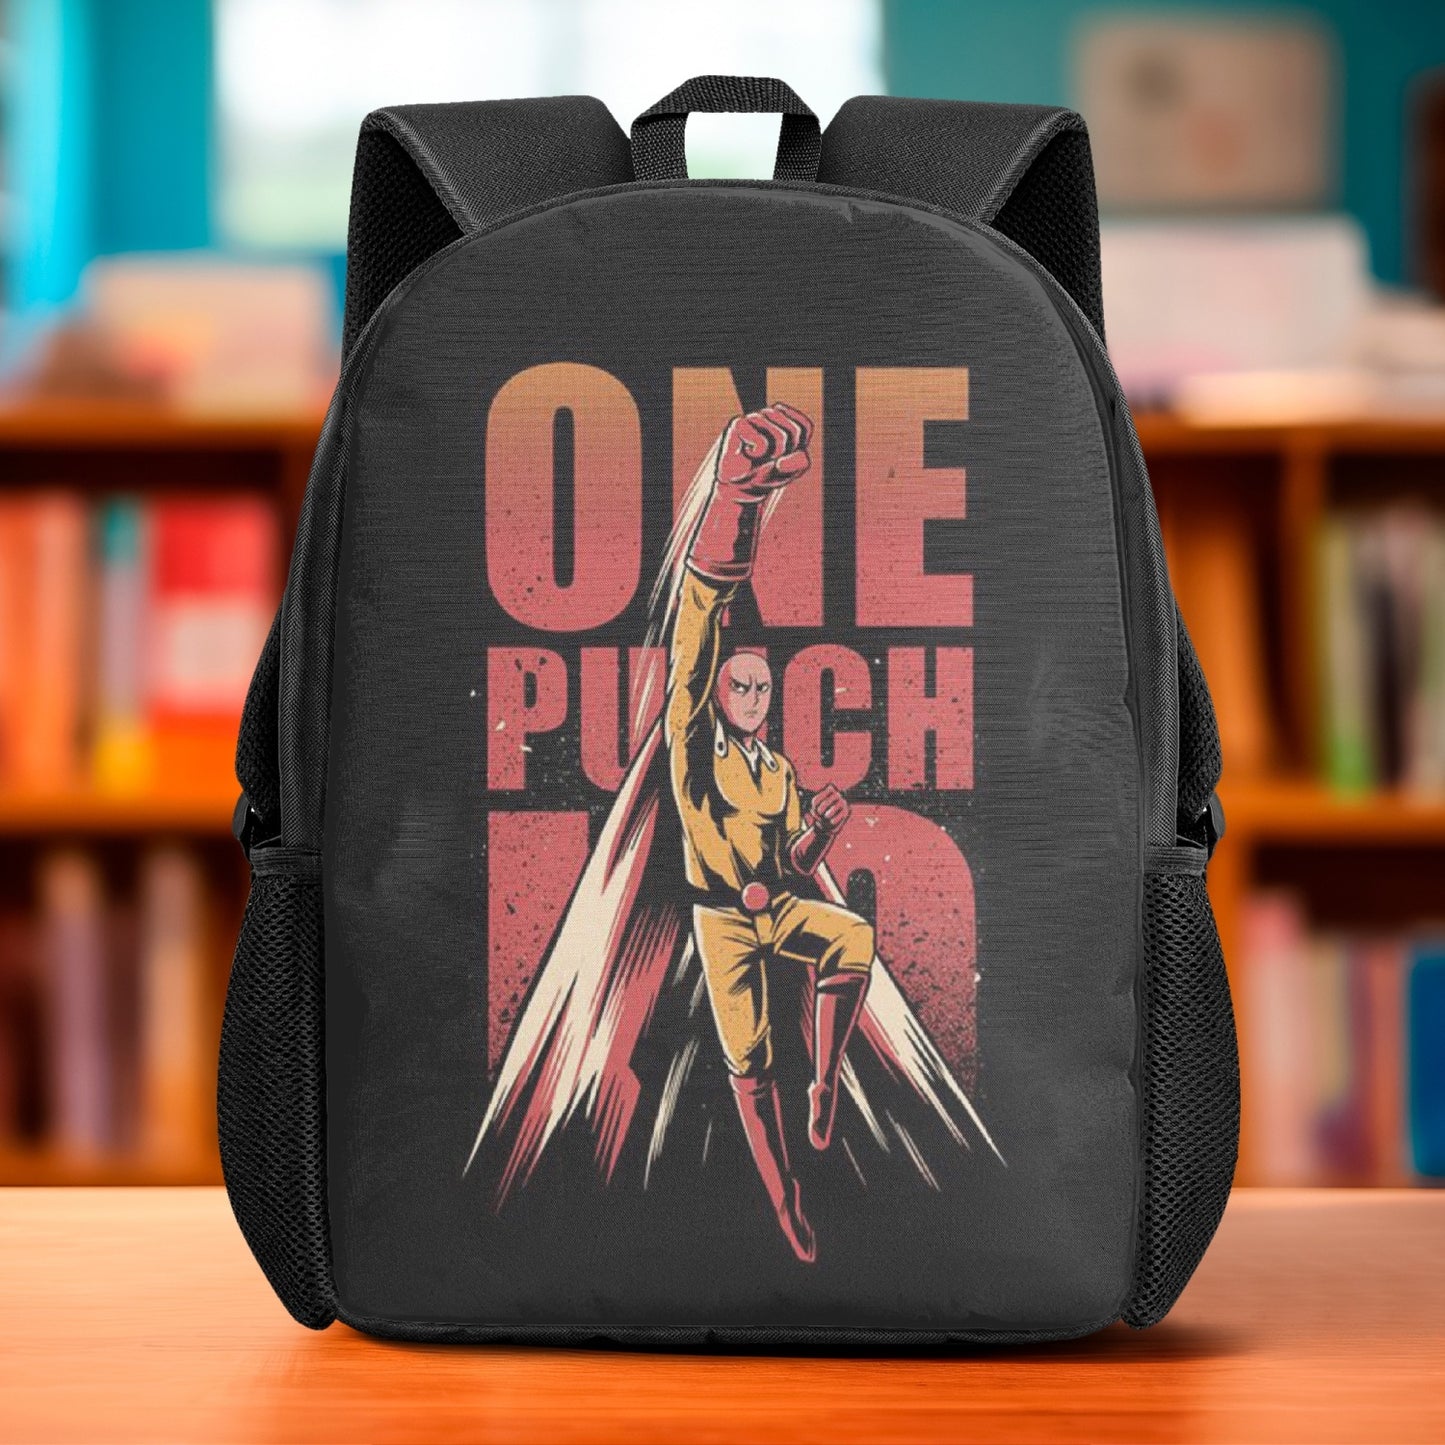 ONE PUNCH MAN Laptop Backpack